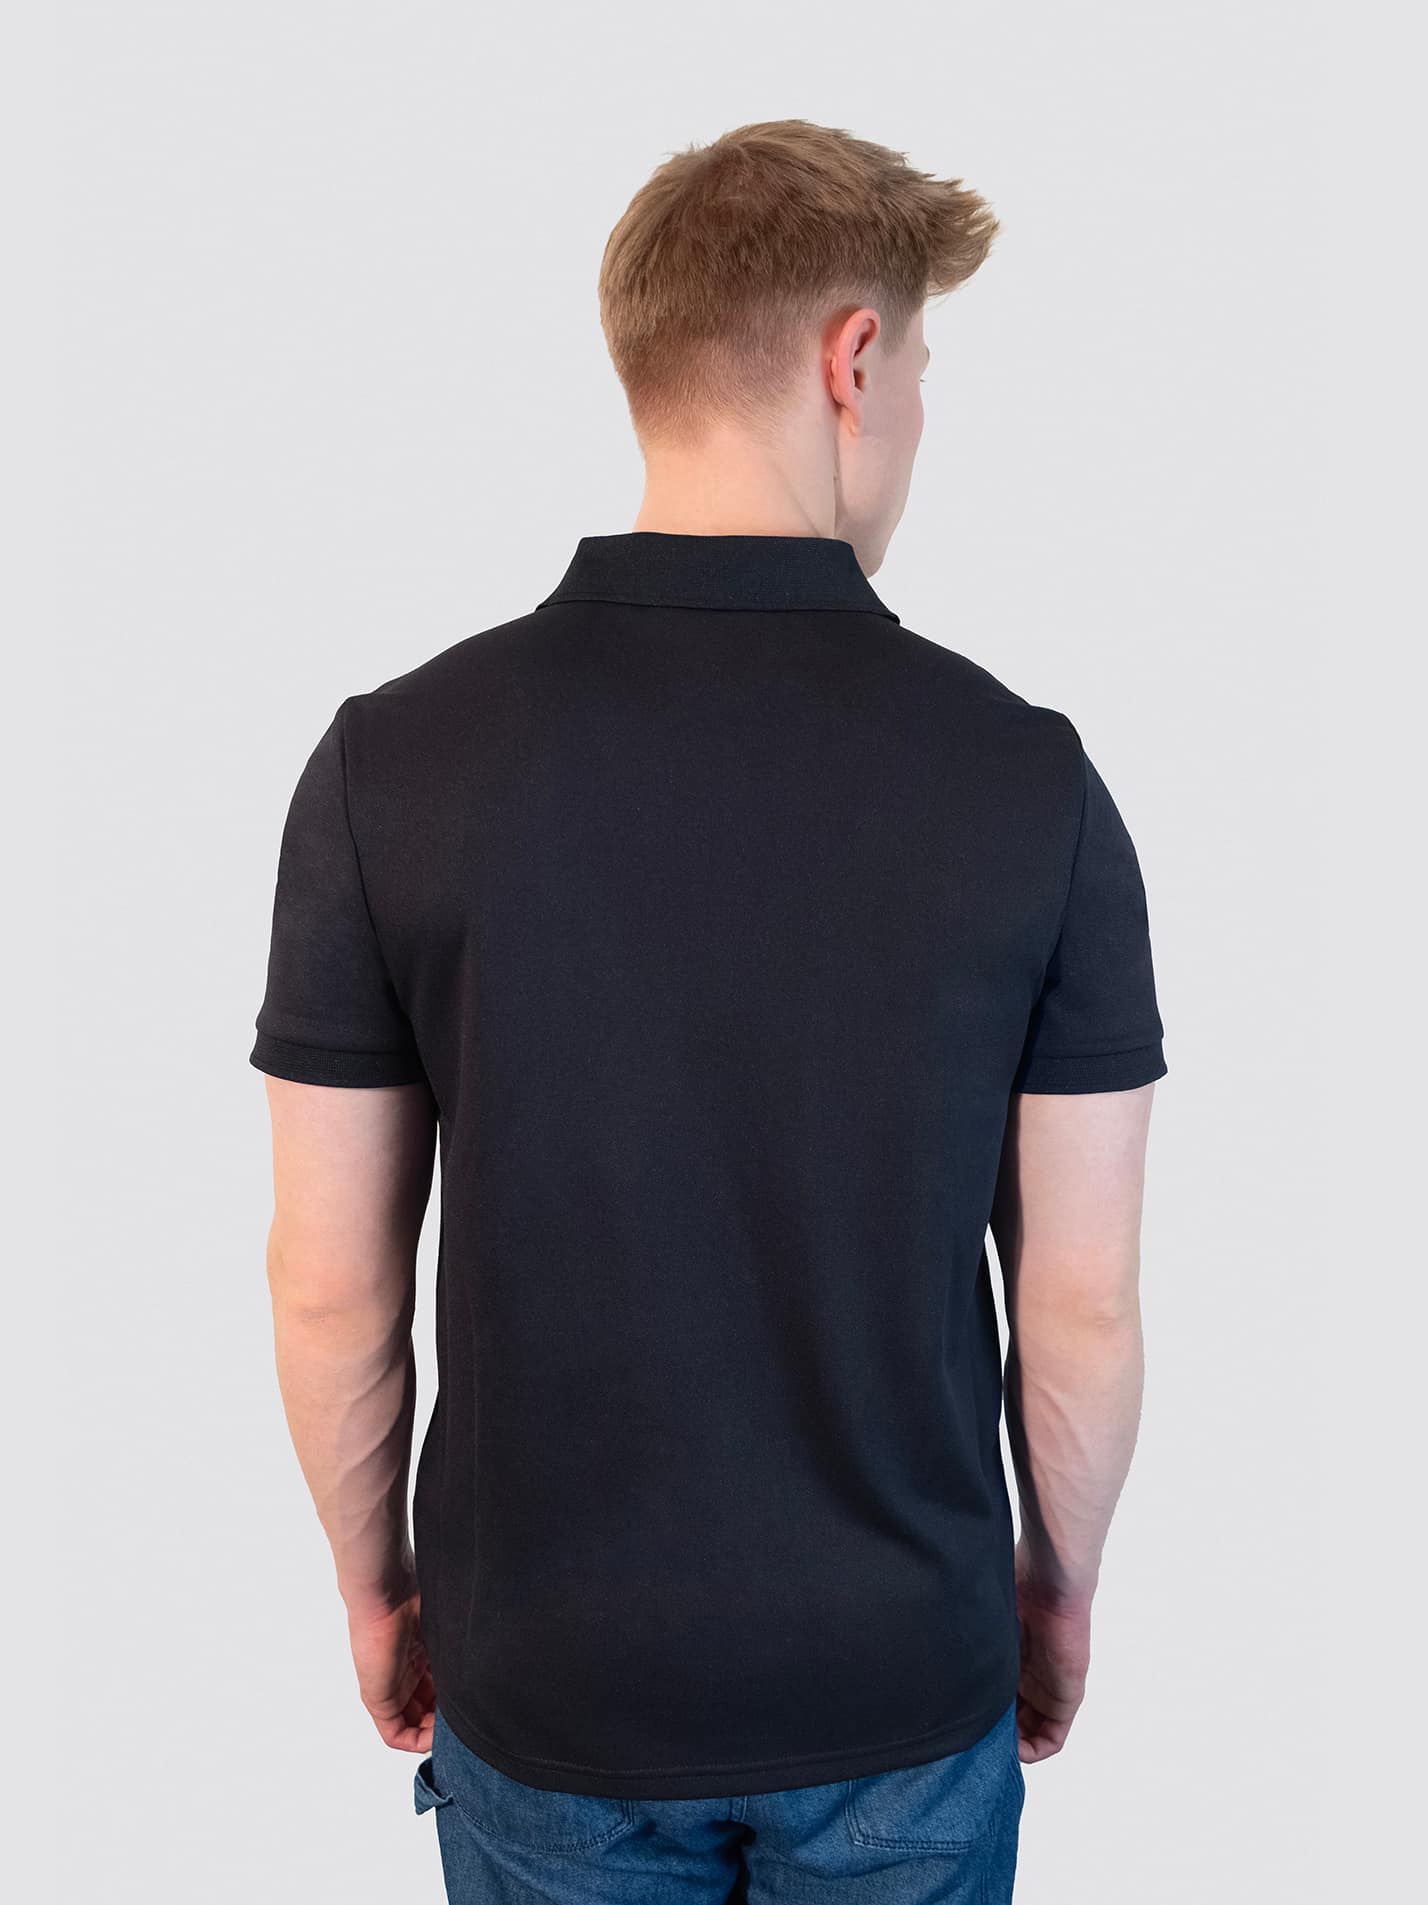 St Cuthbert's Society Durham Sustainable Men's Polo Shirt